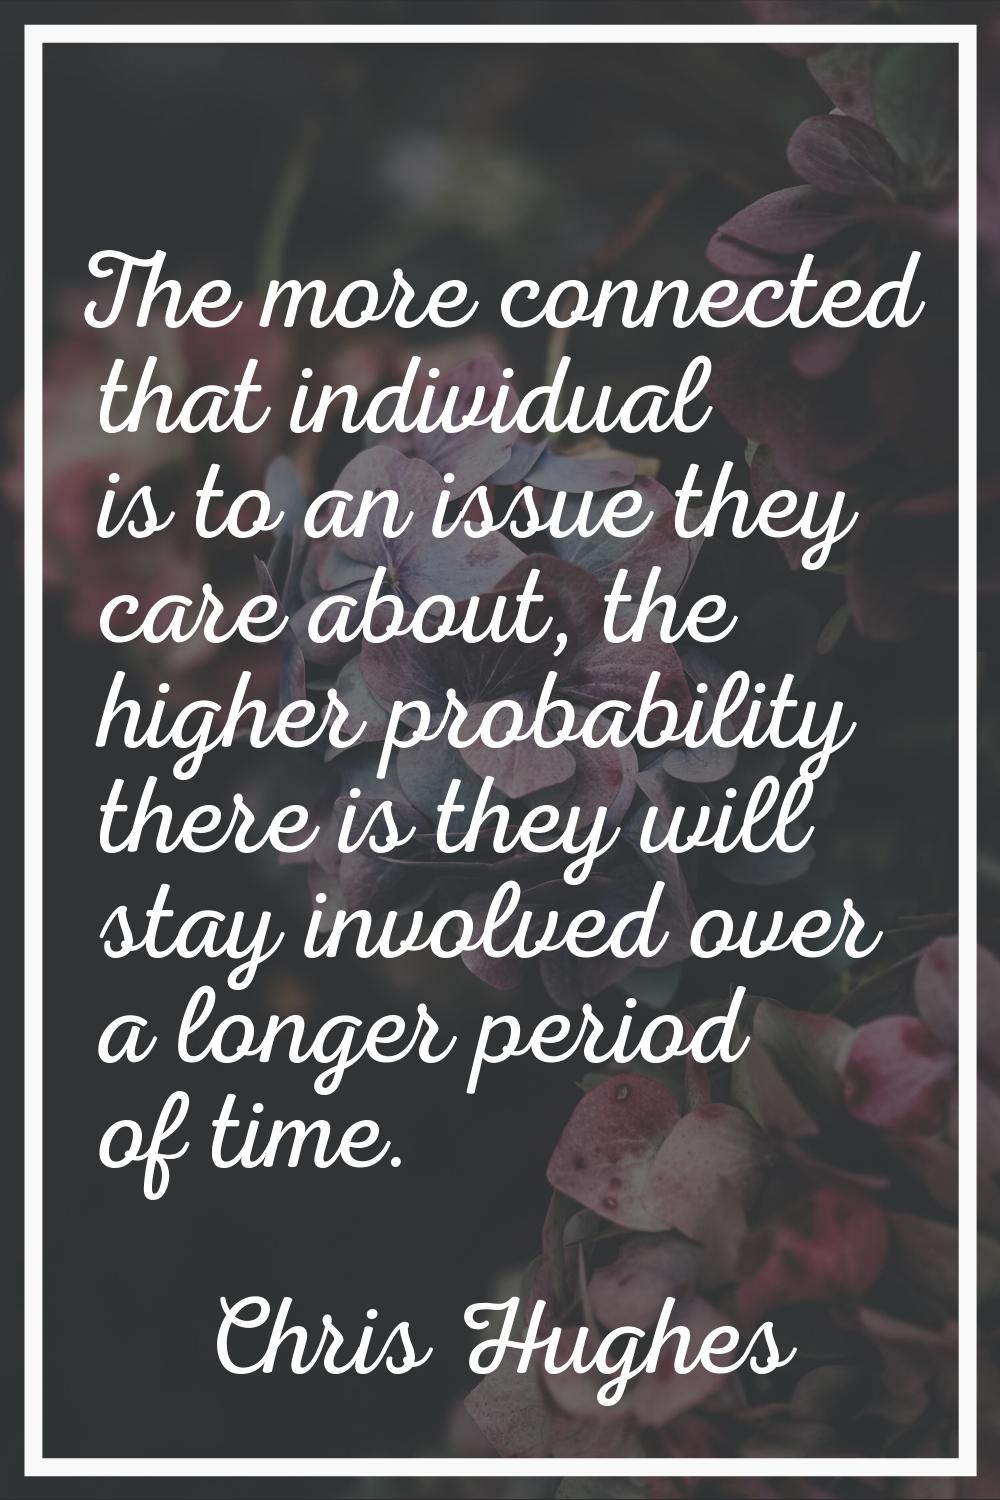 The more connected that individual is to an issue they care about, the higher probability there is 